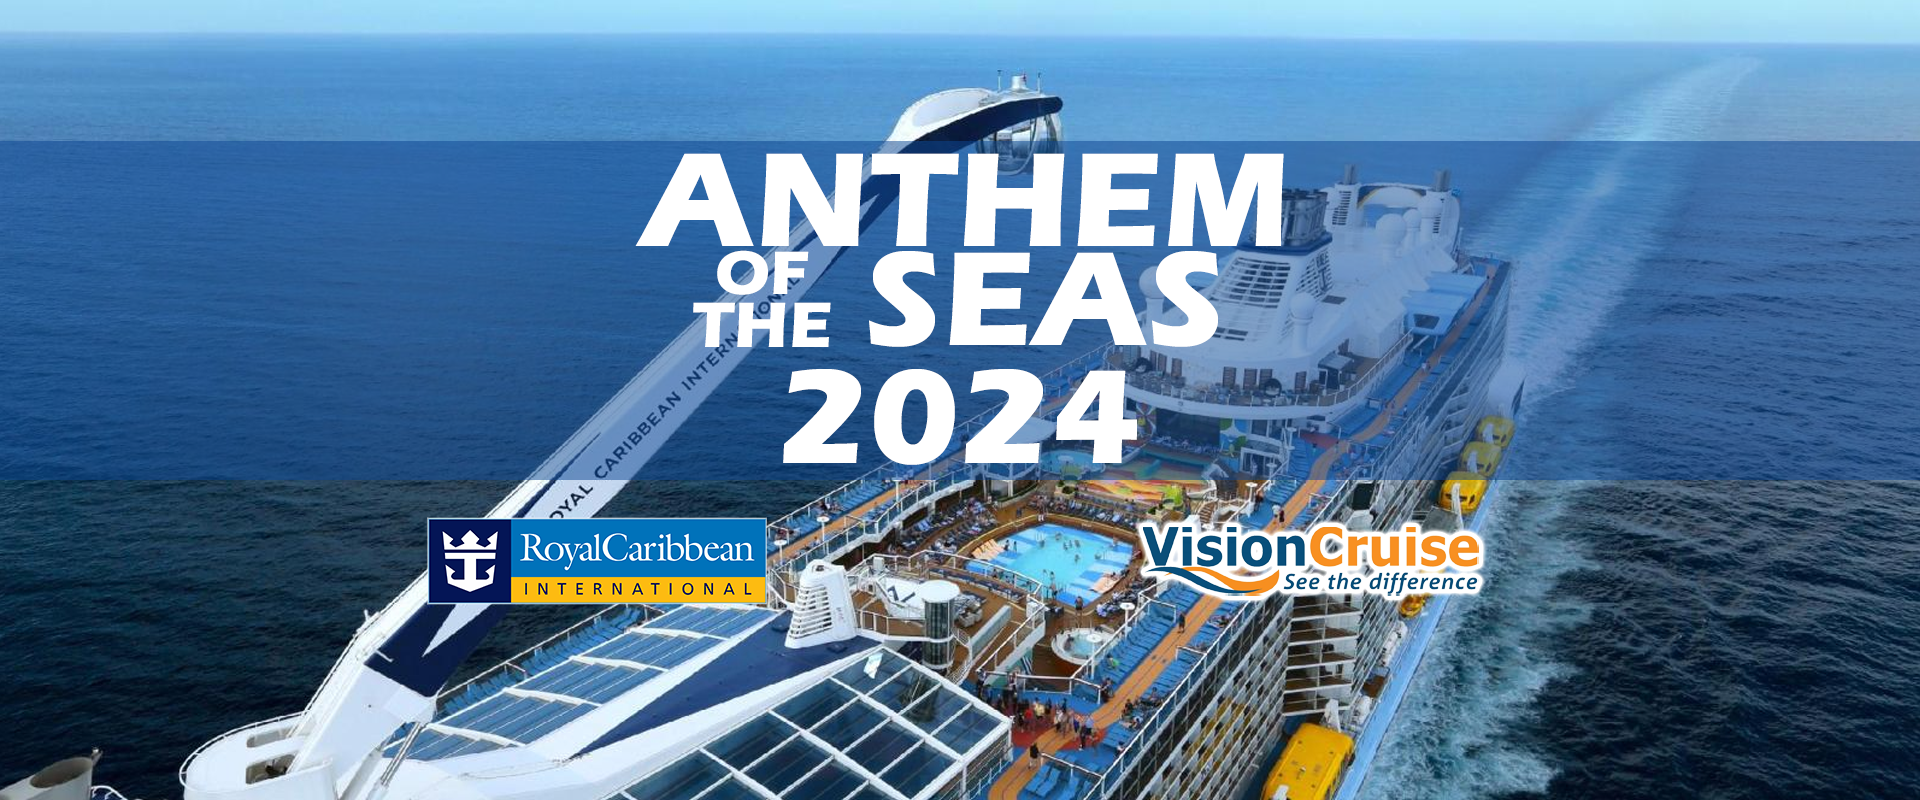 Anthem of the Seas 2024 PreRegistration Vision Cruise